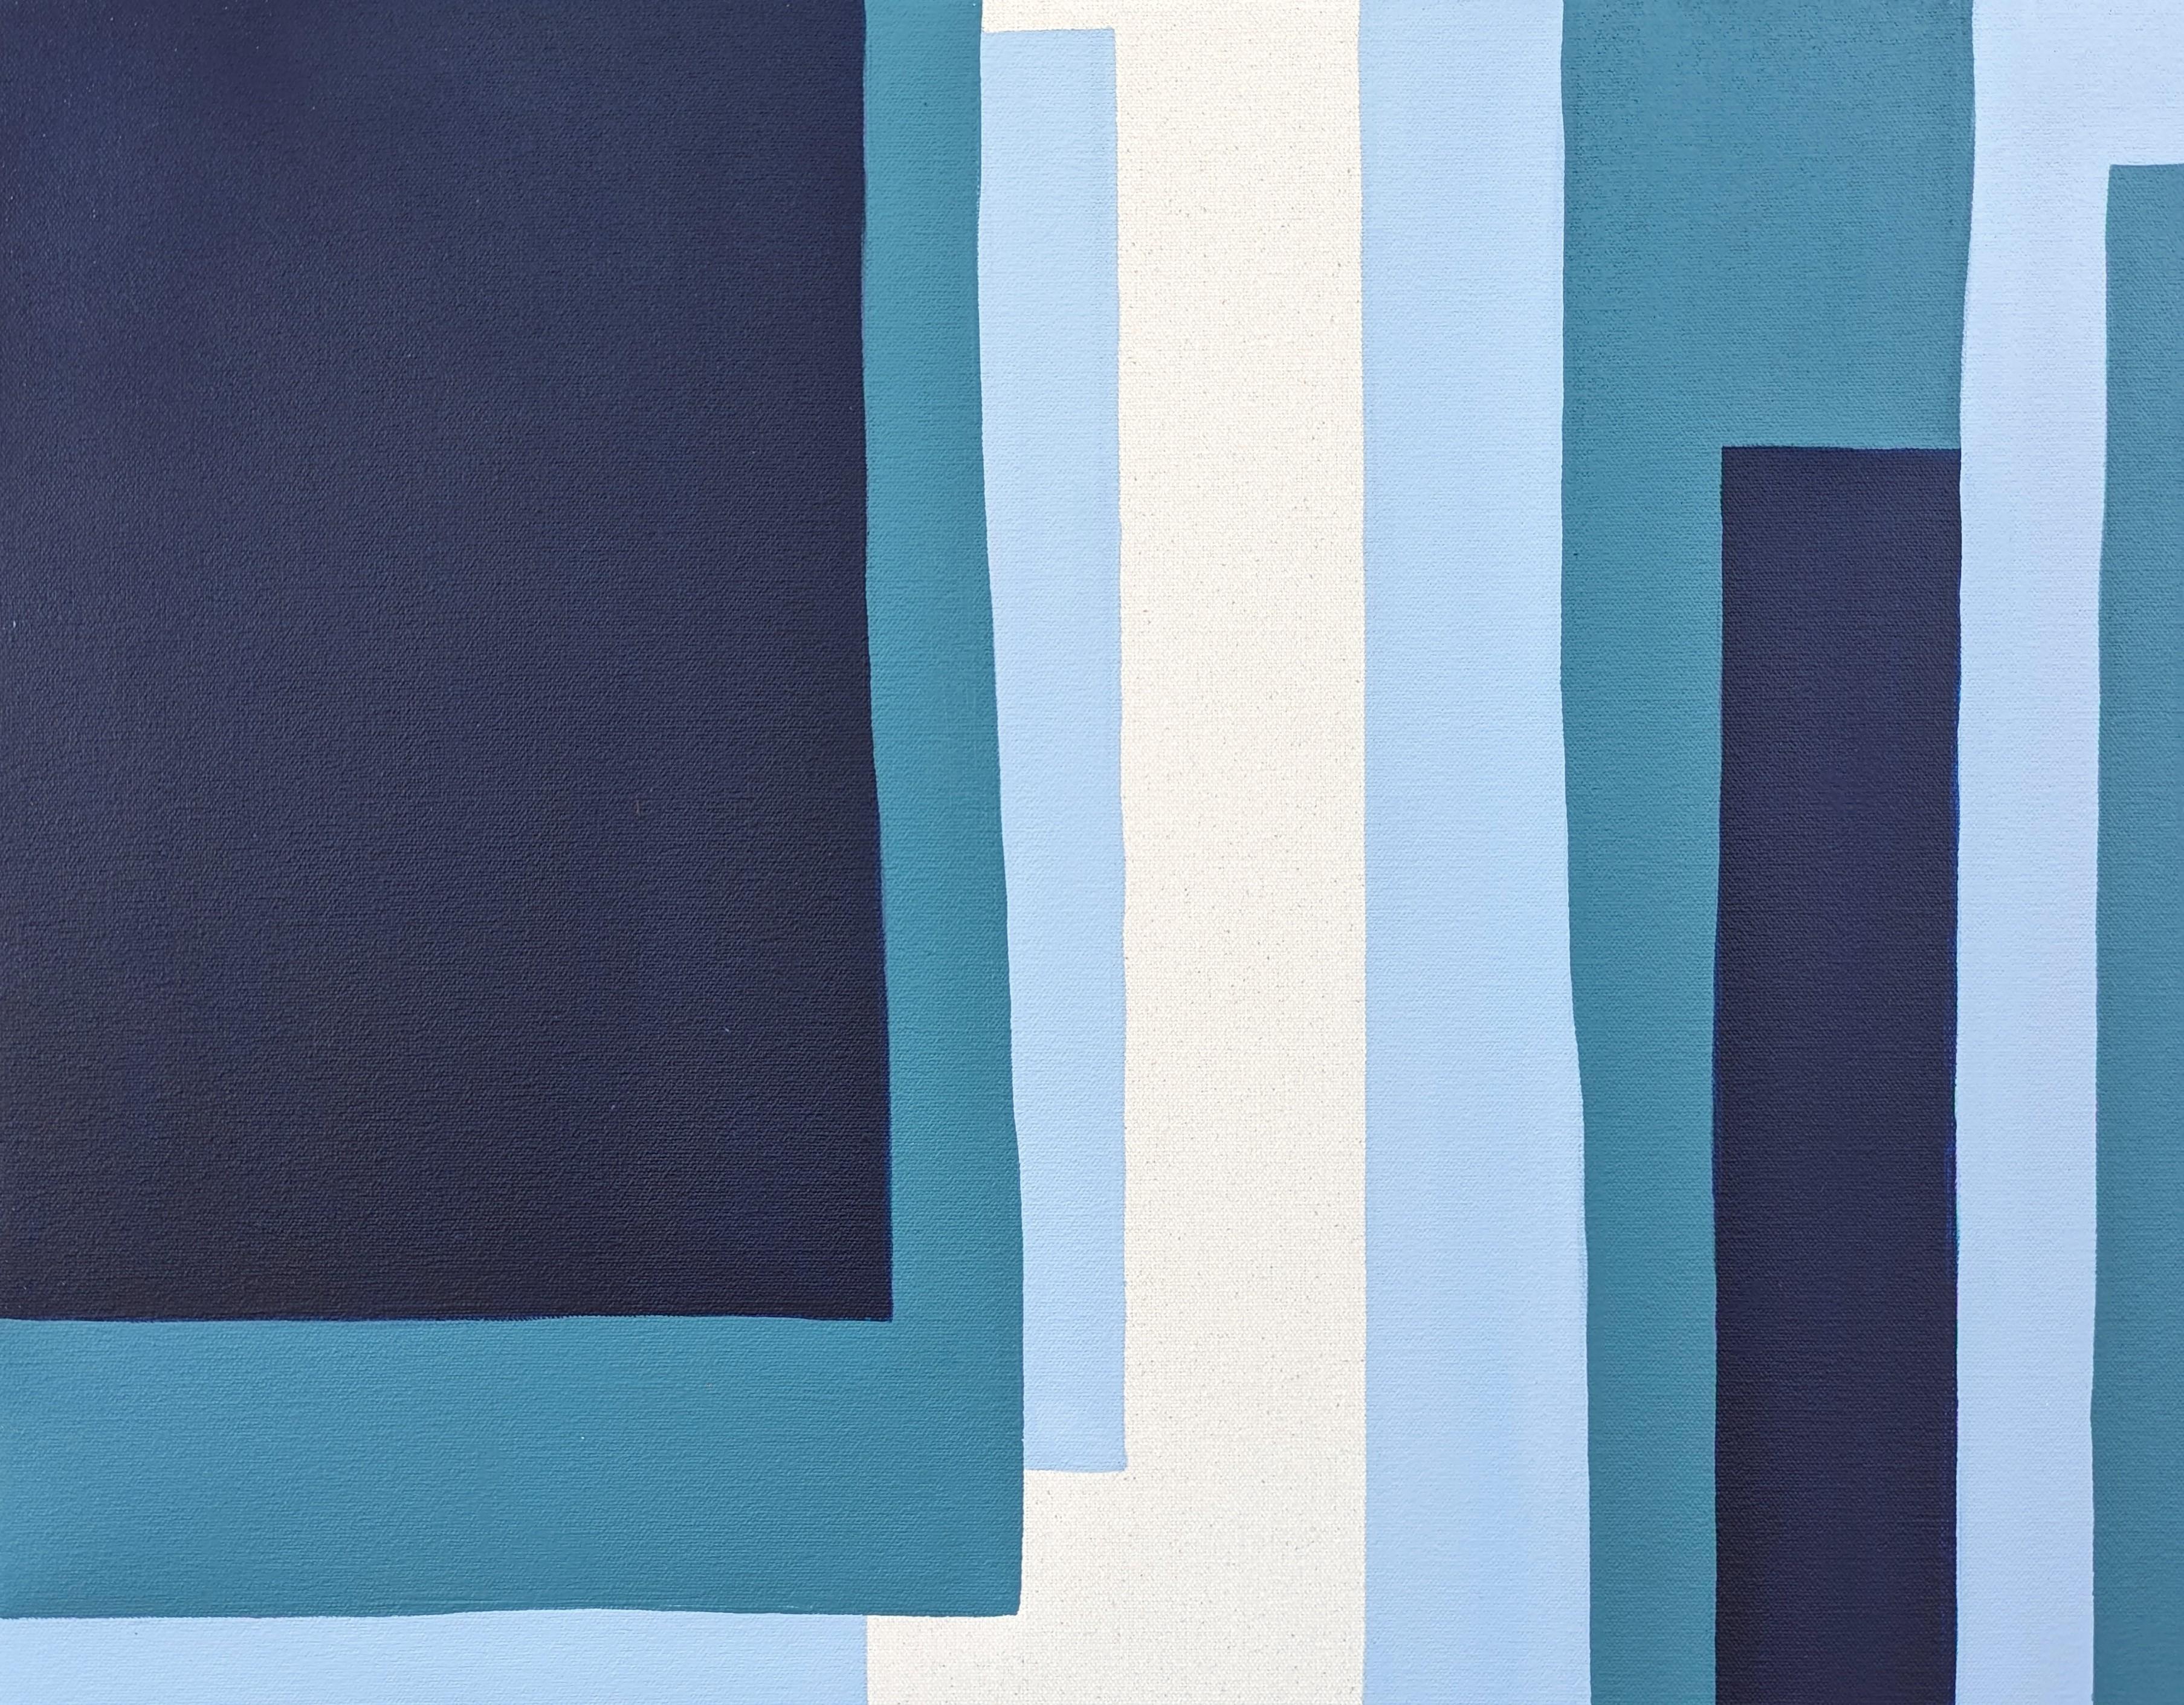 Contemporary abstract geometric painting by Houston-based artist Holland Geibel. The work features layers of rectangular shapes in various tones of blue, teal, and white. Signed, titled, and dated on the reverse. Currently unframed, but options are